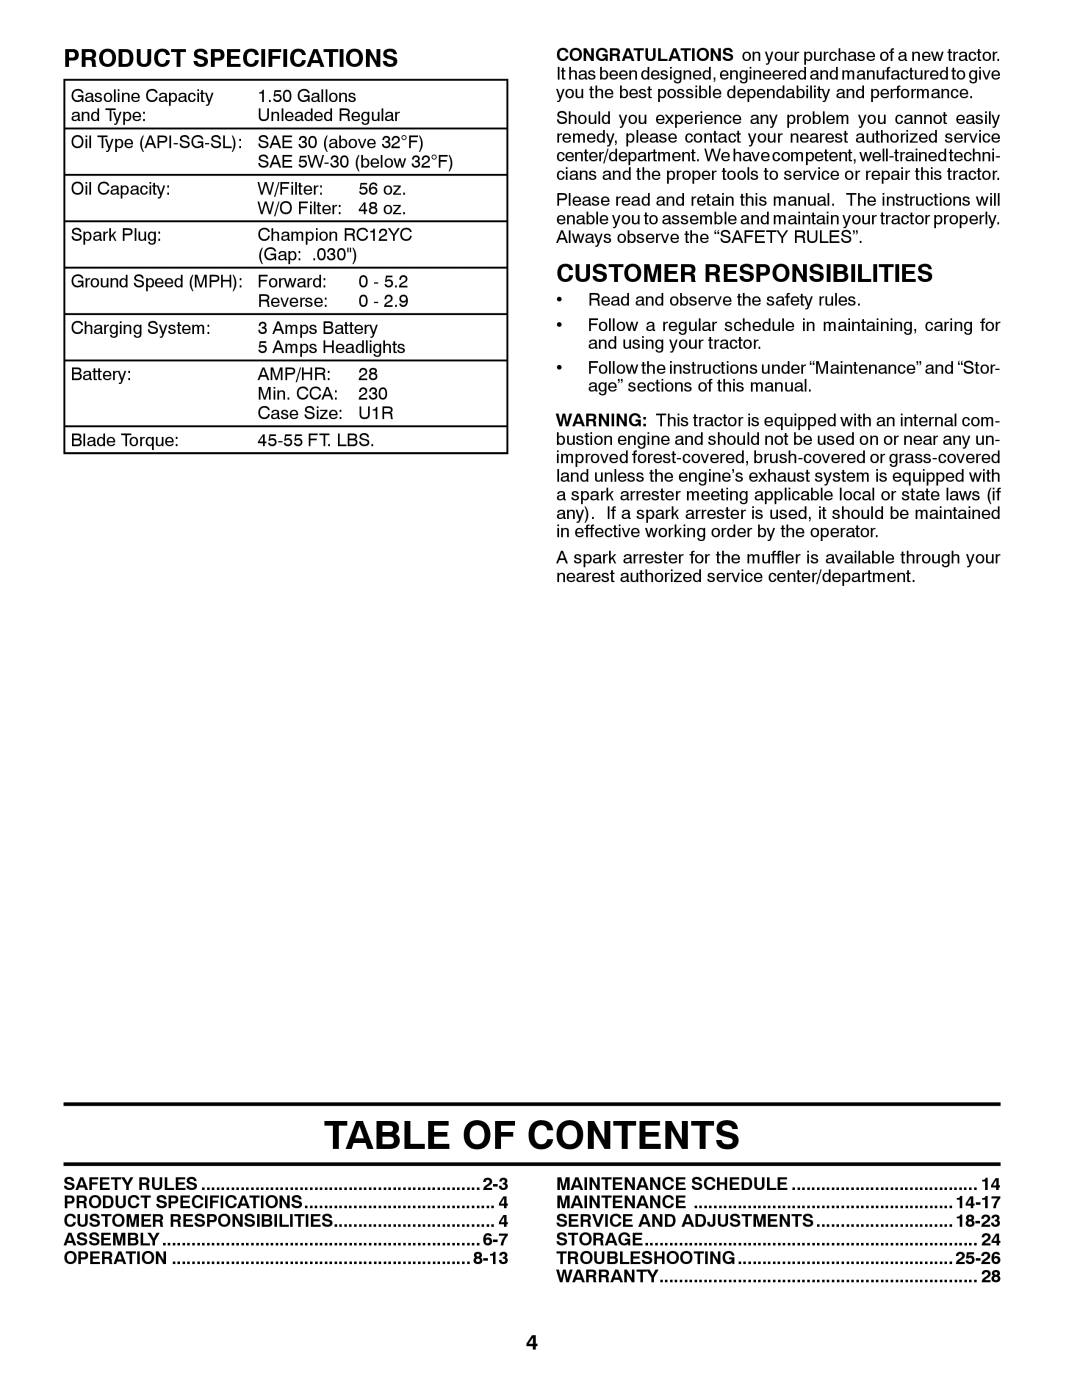 McCulloch 96041018000 manual Table Of Contents, Product Specifications, Customer Responsibilities 